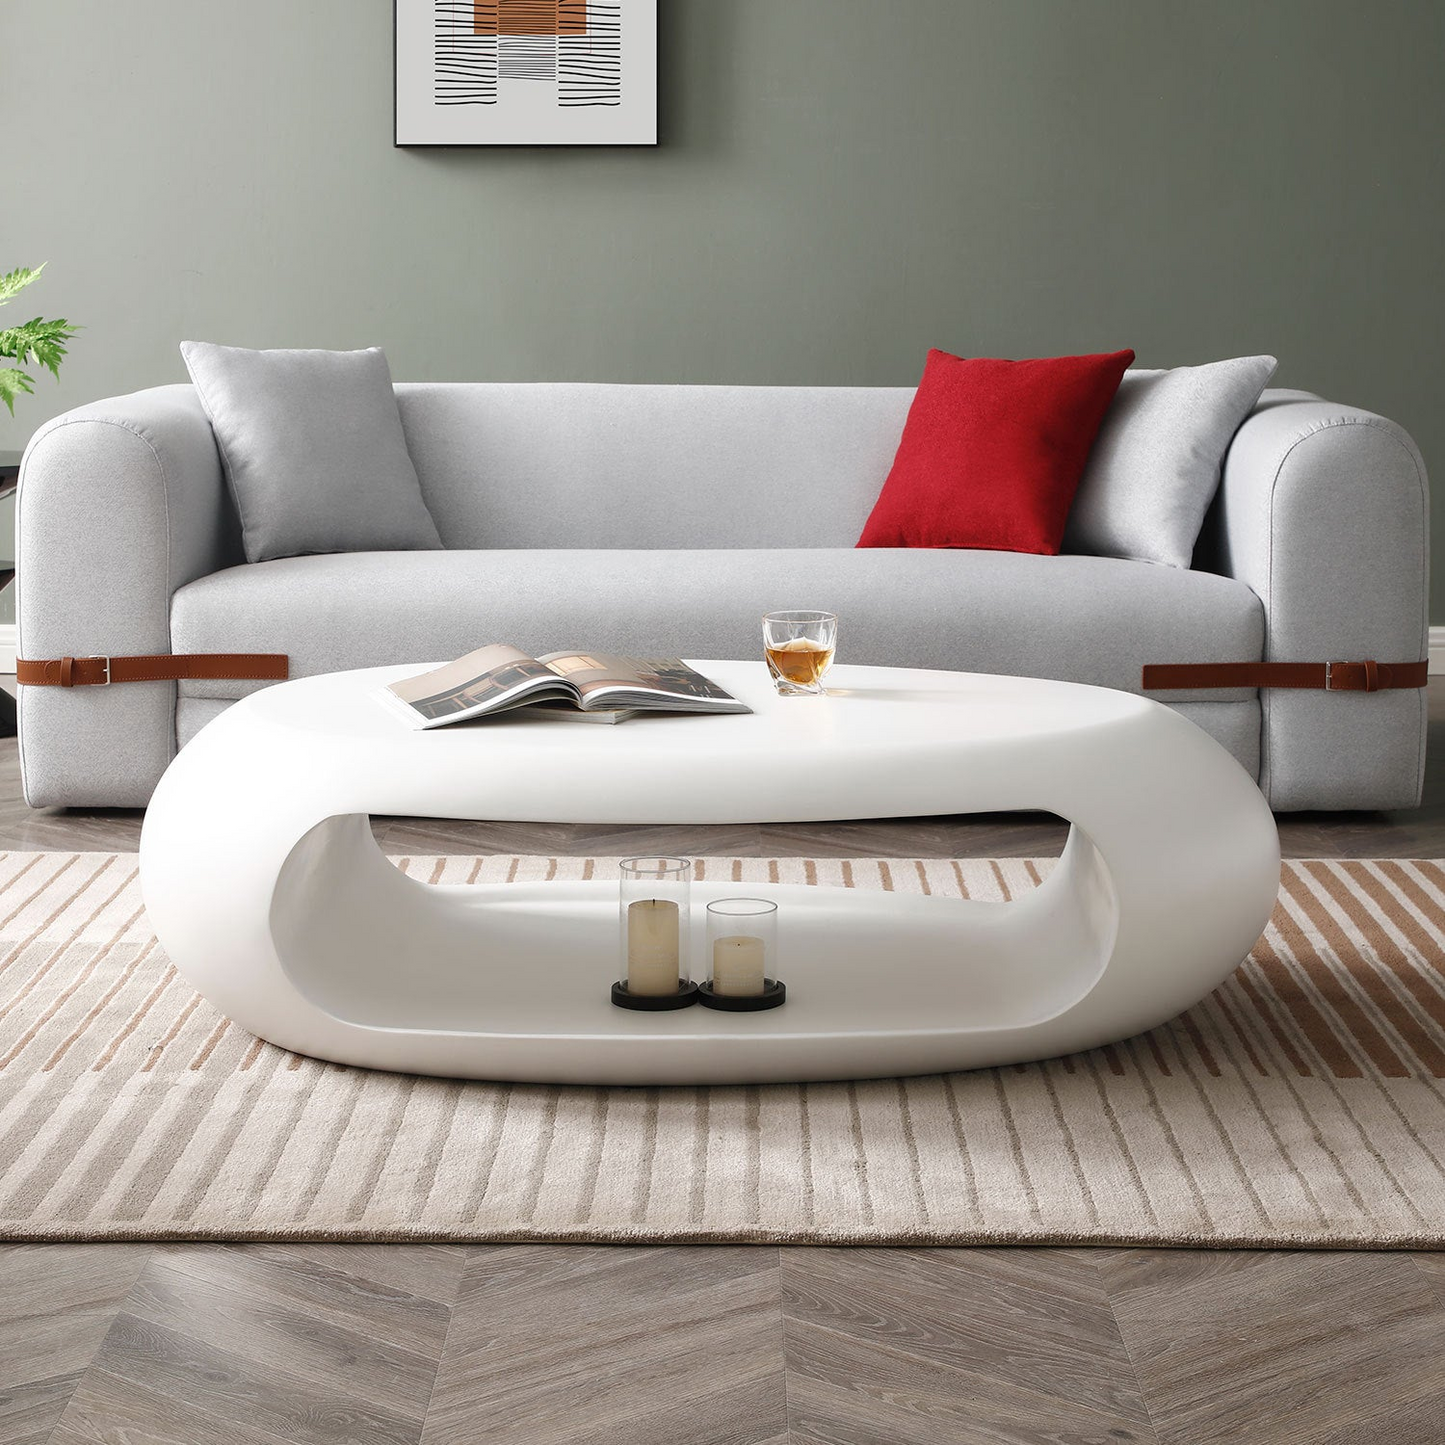 48.42'' Modern Oval Coffee Table, Sturdy Fiberglass Center Cocktail Table Tea Table for Living Room, White, No Need Assembly, Goodies N Stuff